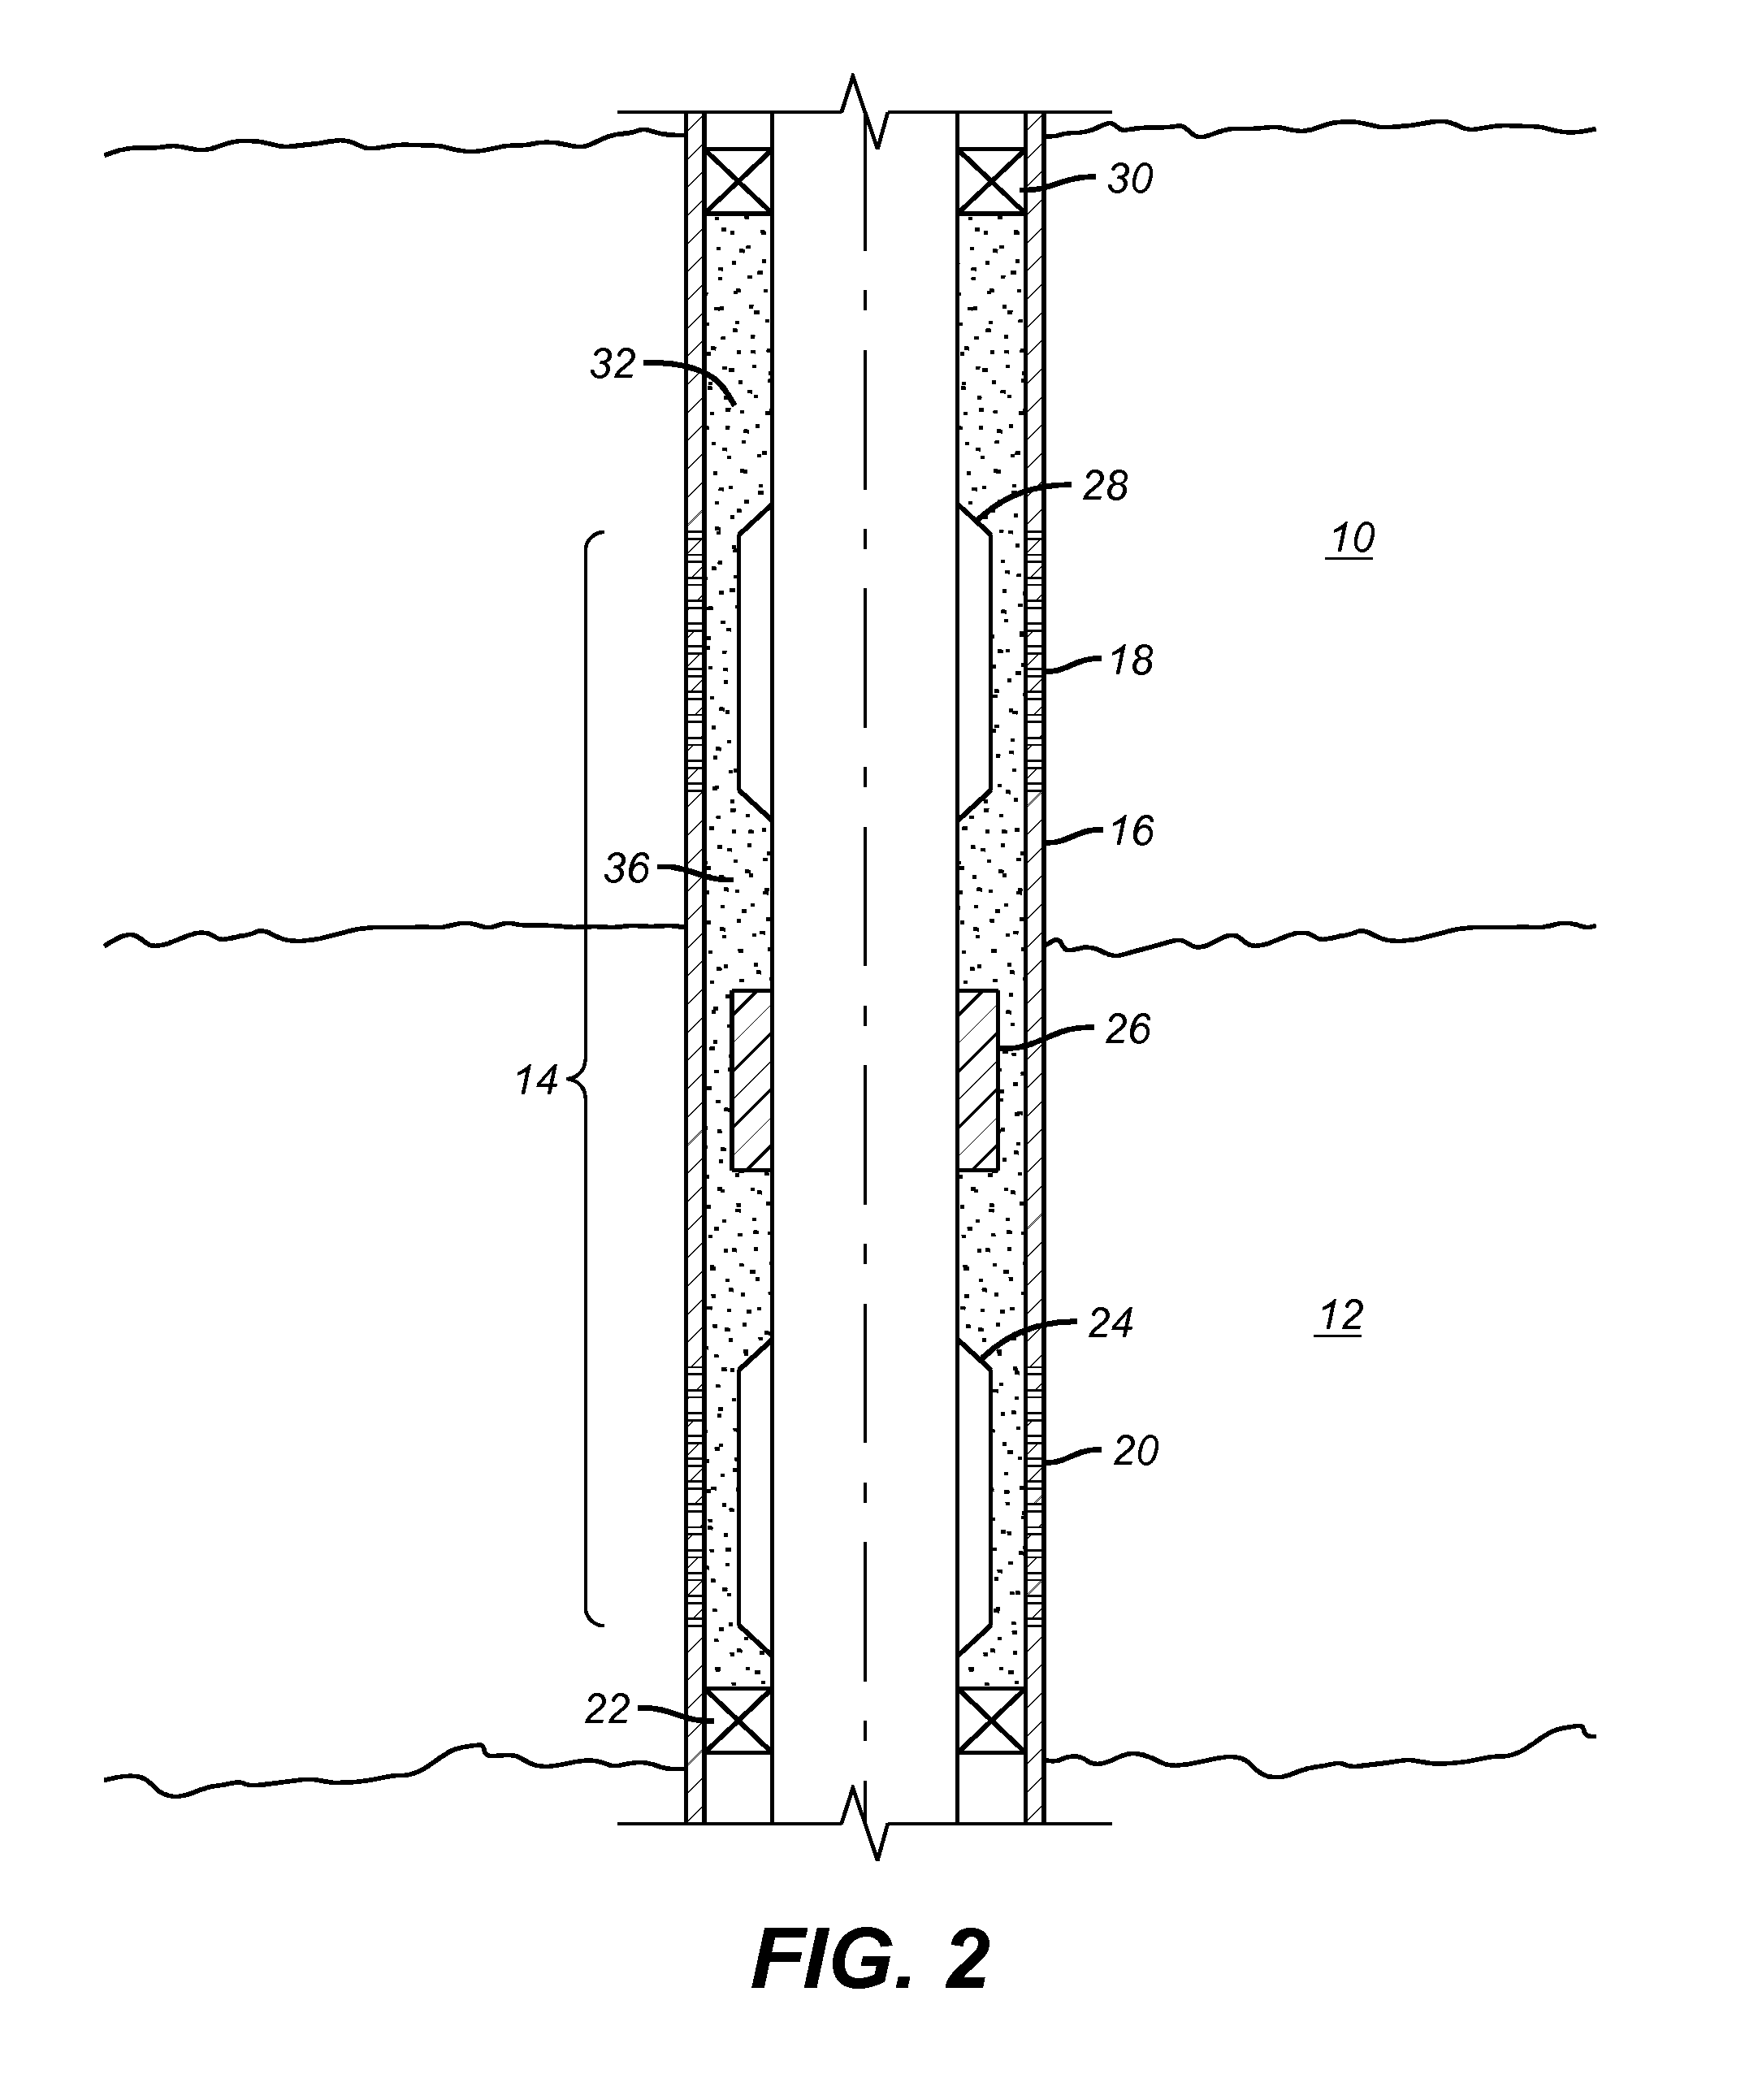 Method of isolating and completing multi-zone frac packs